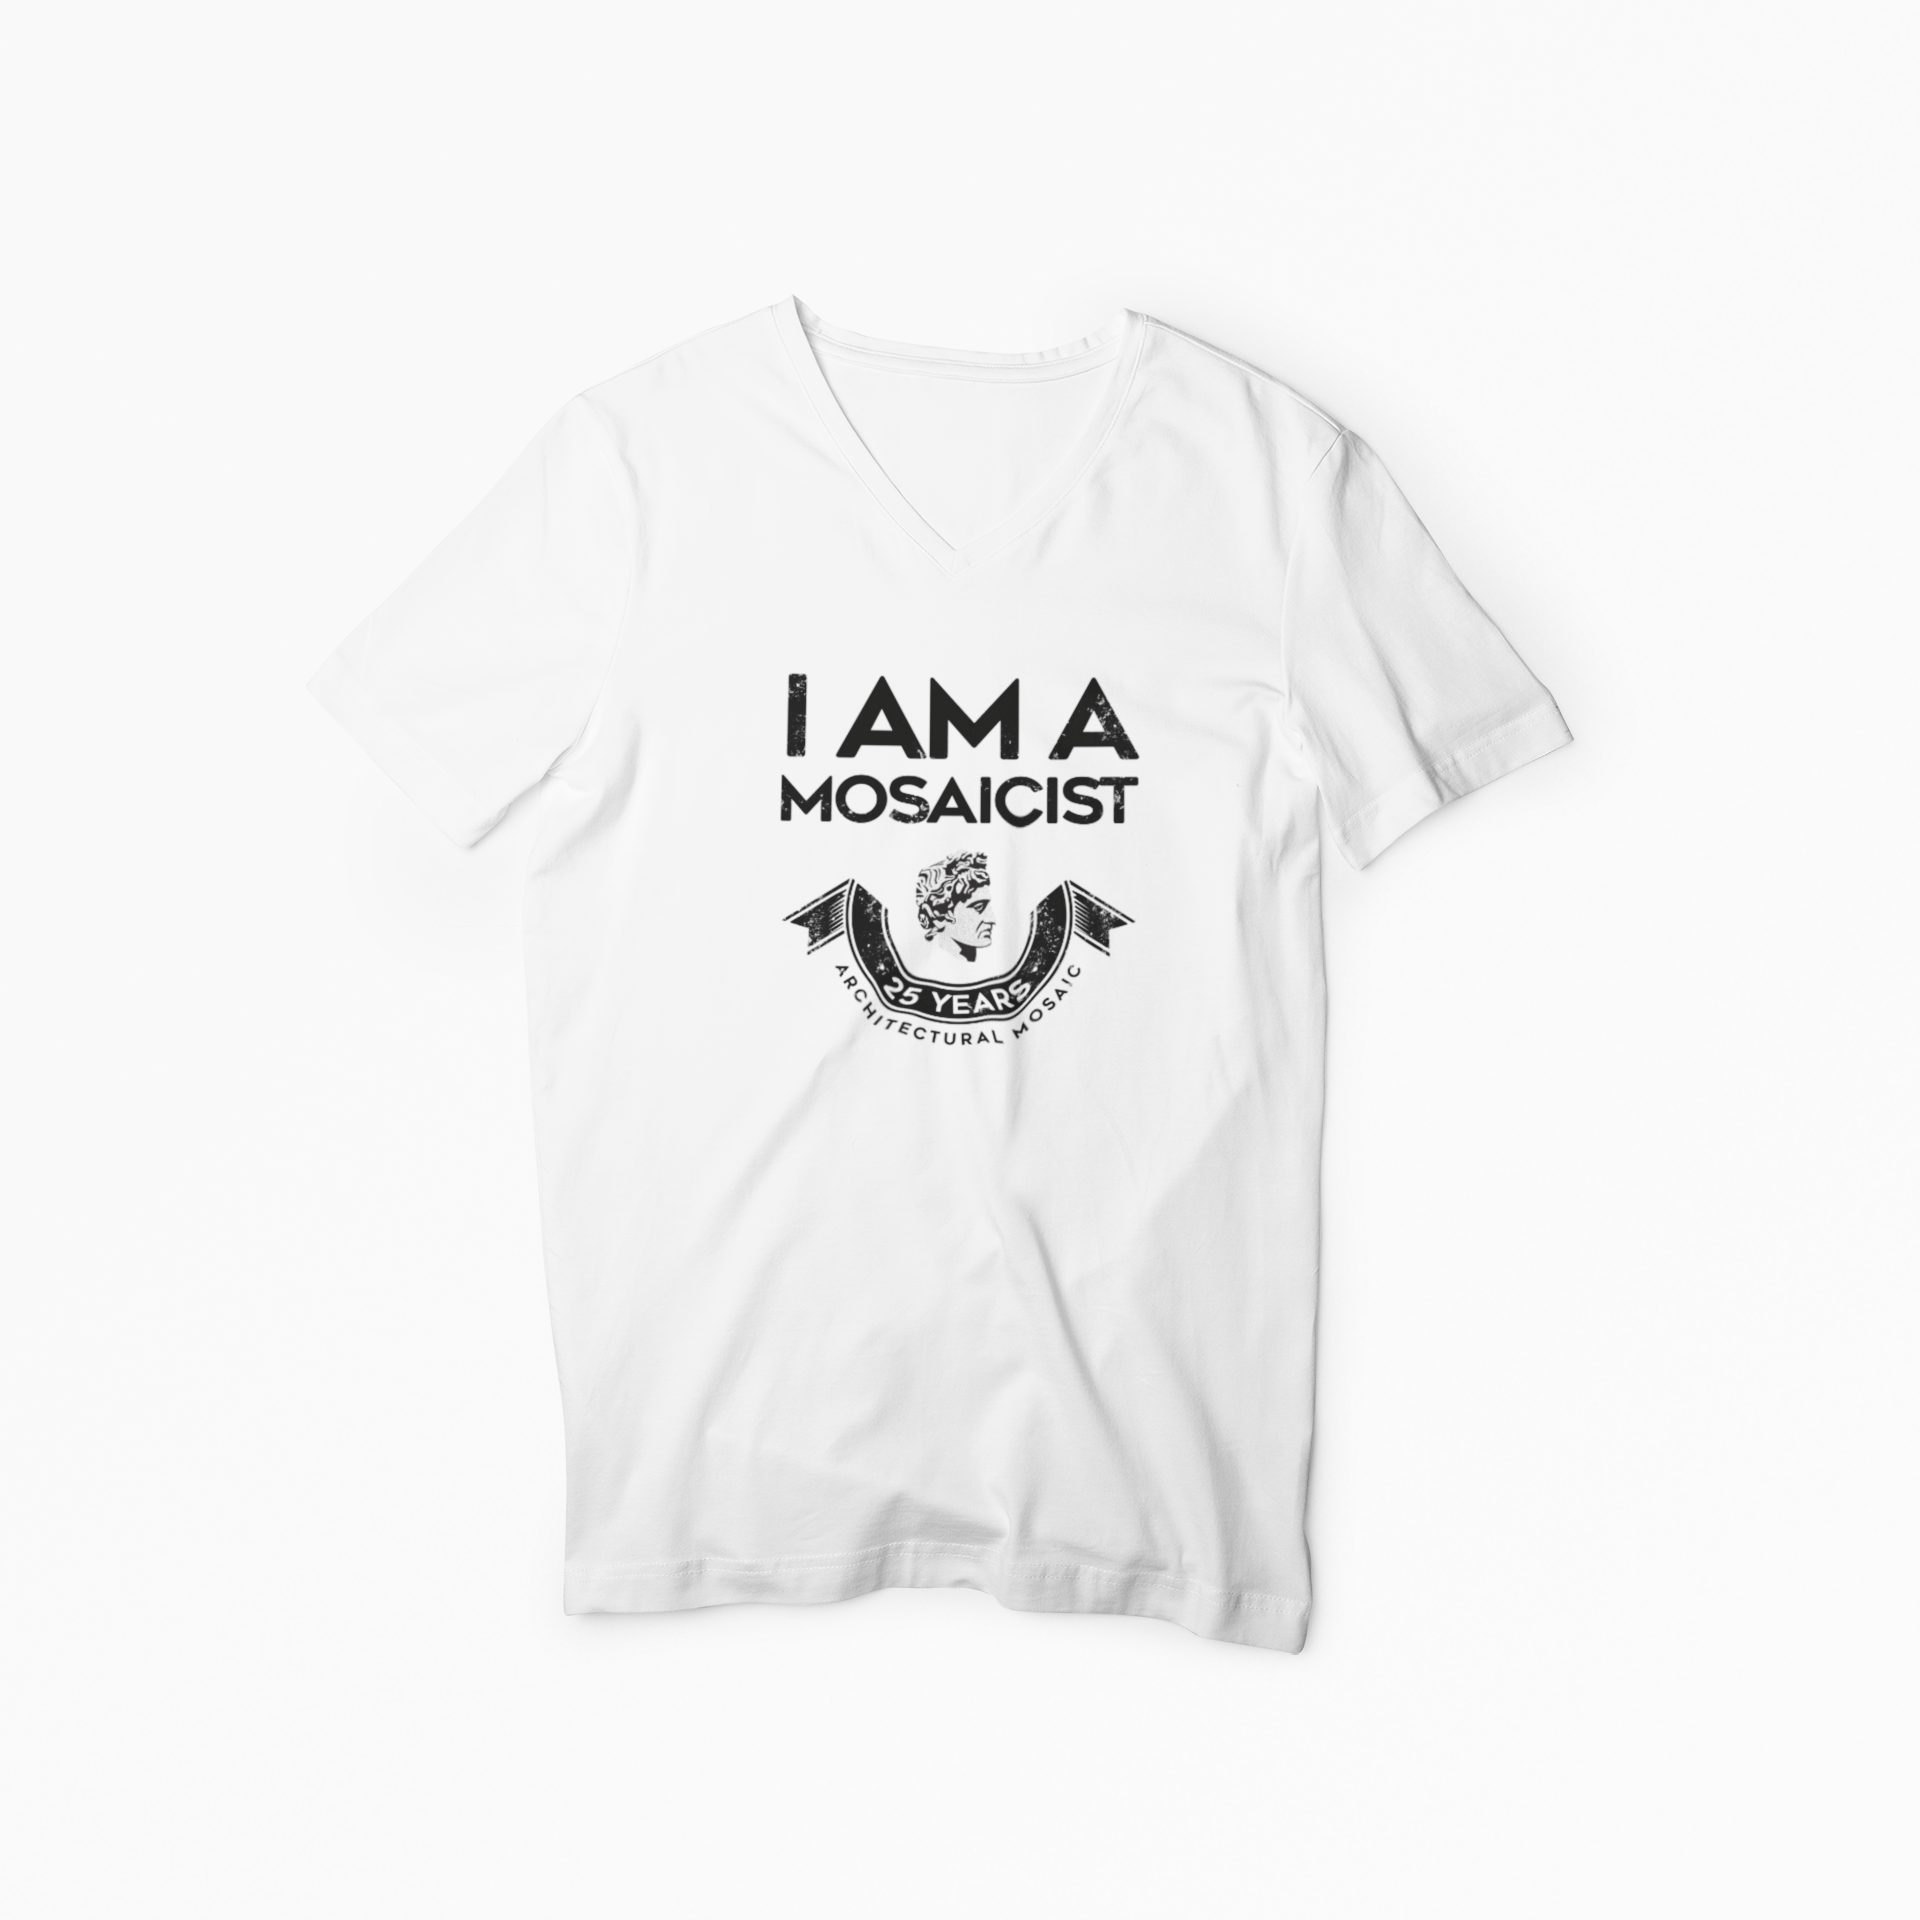 "I AM A MOSAICIST" V-Neck T-shirt from Mosaicist - White